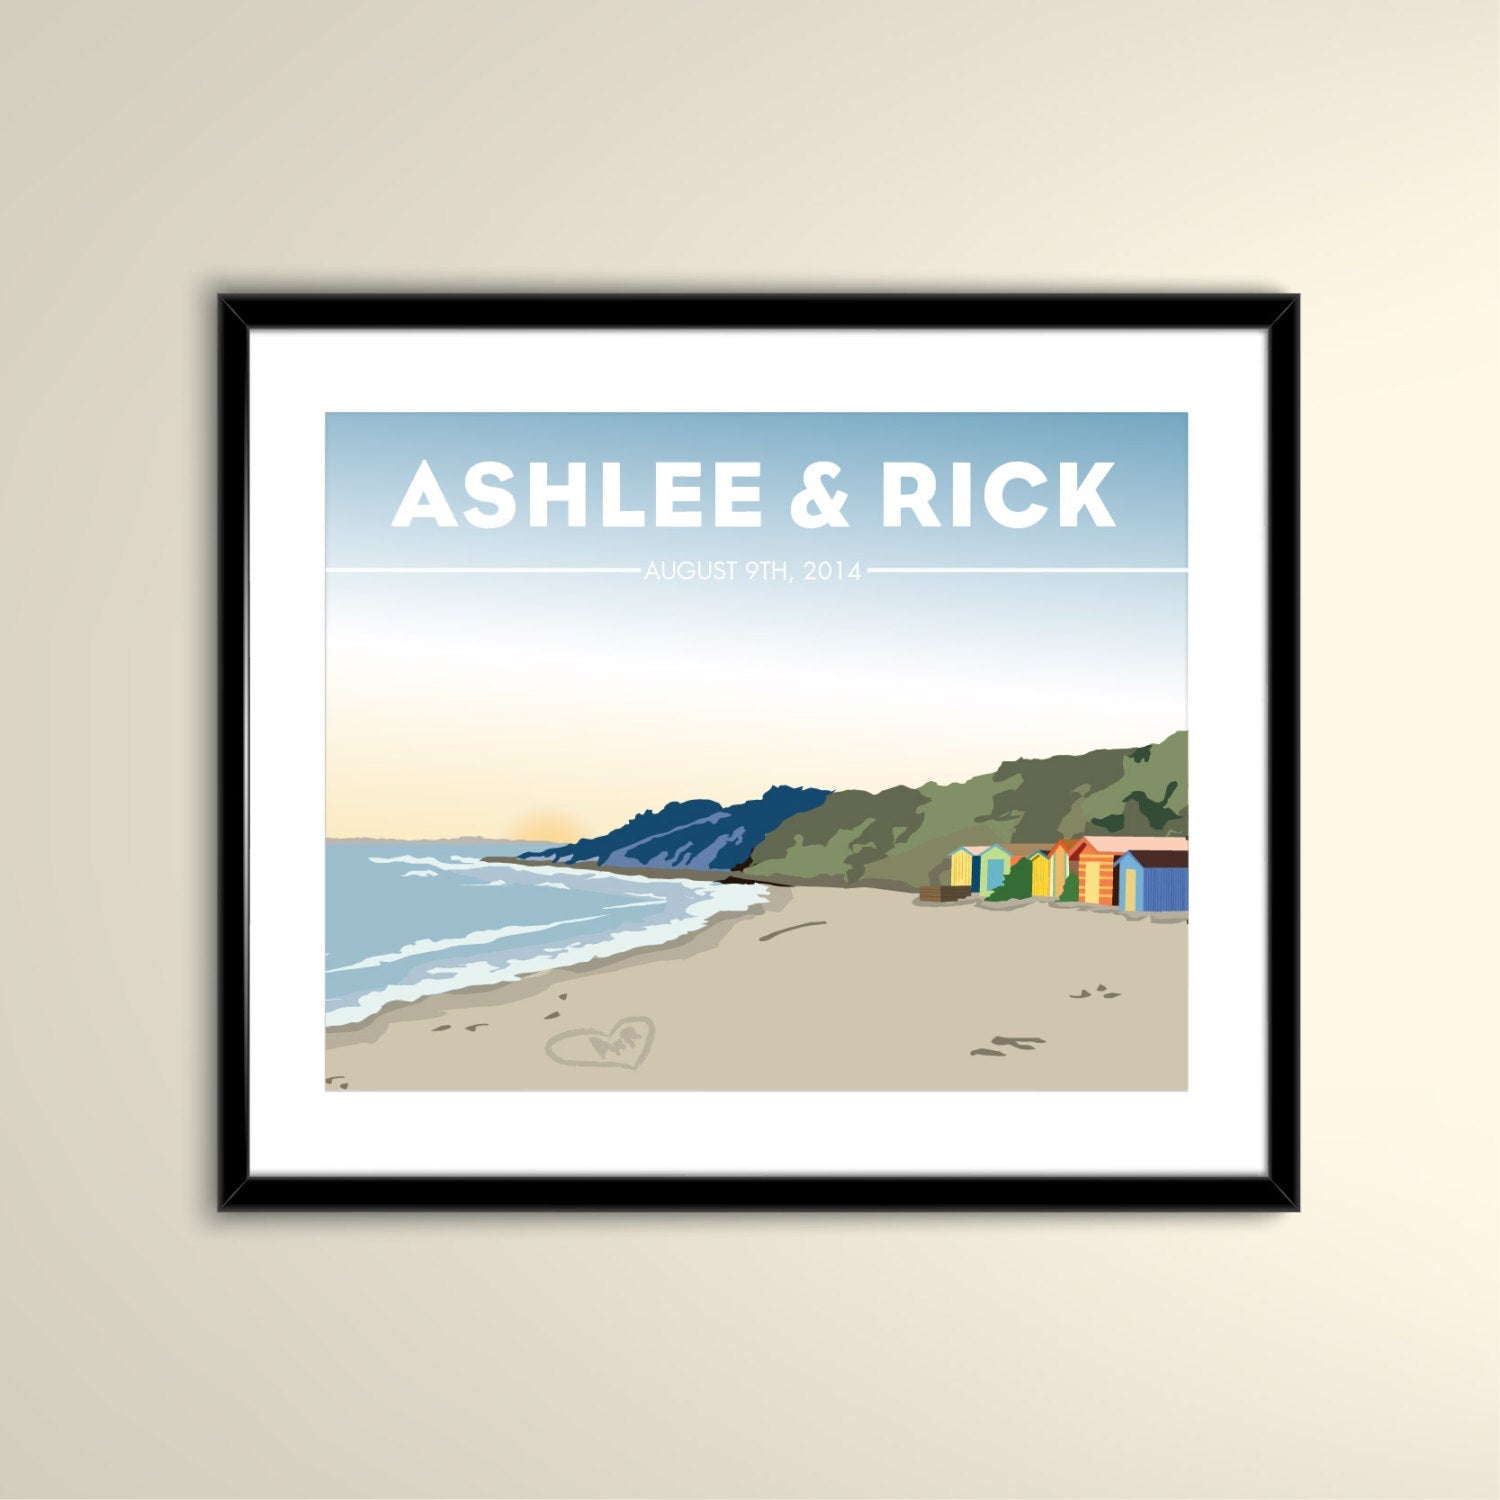 Australian Coast, beach huts, beach, Travel Poster, 11x14 Paper Wedding Poster - Personalized with Names and date (frame not included)